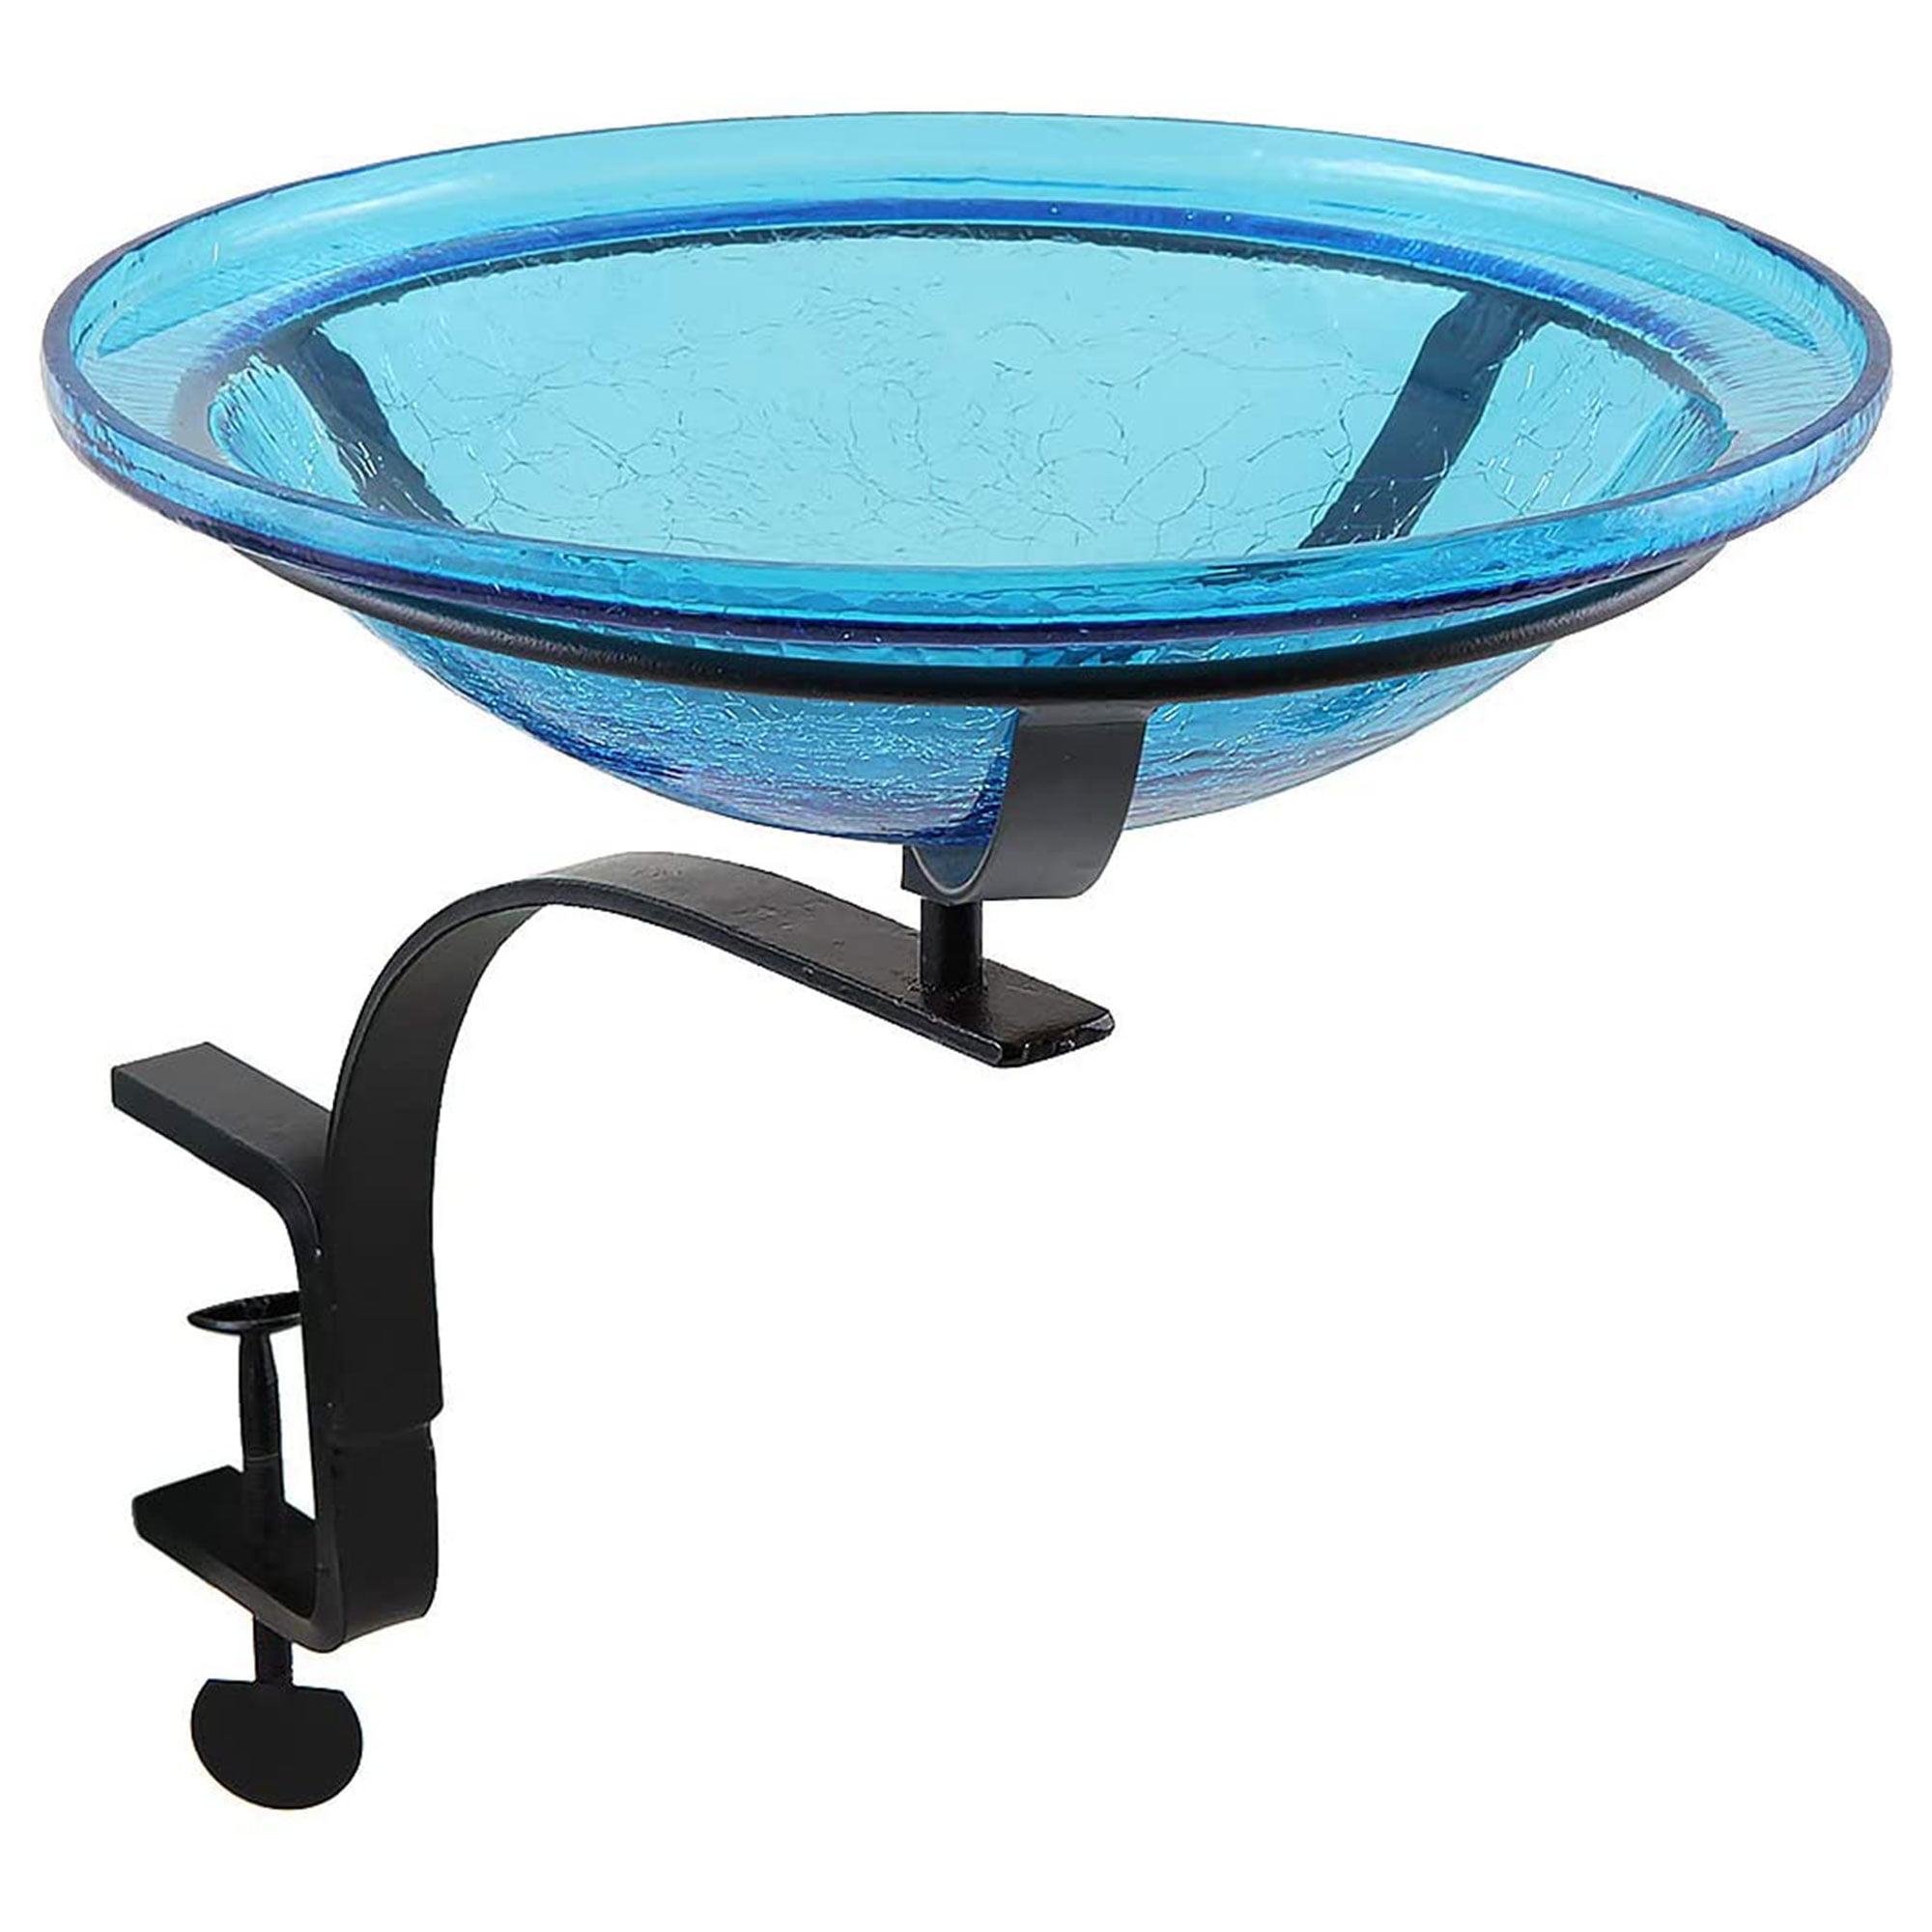 Picture of Achla CGB-07T-RM 12 in. Teal Crackle Birdbath with Rail Mount Bracket